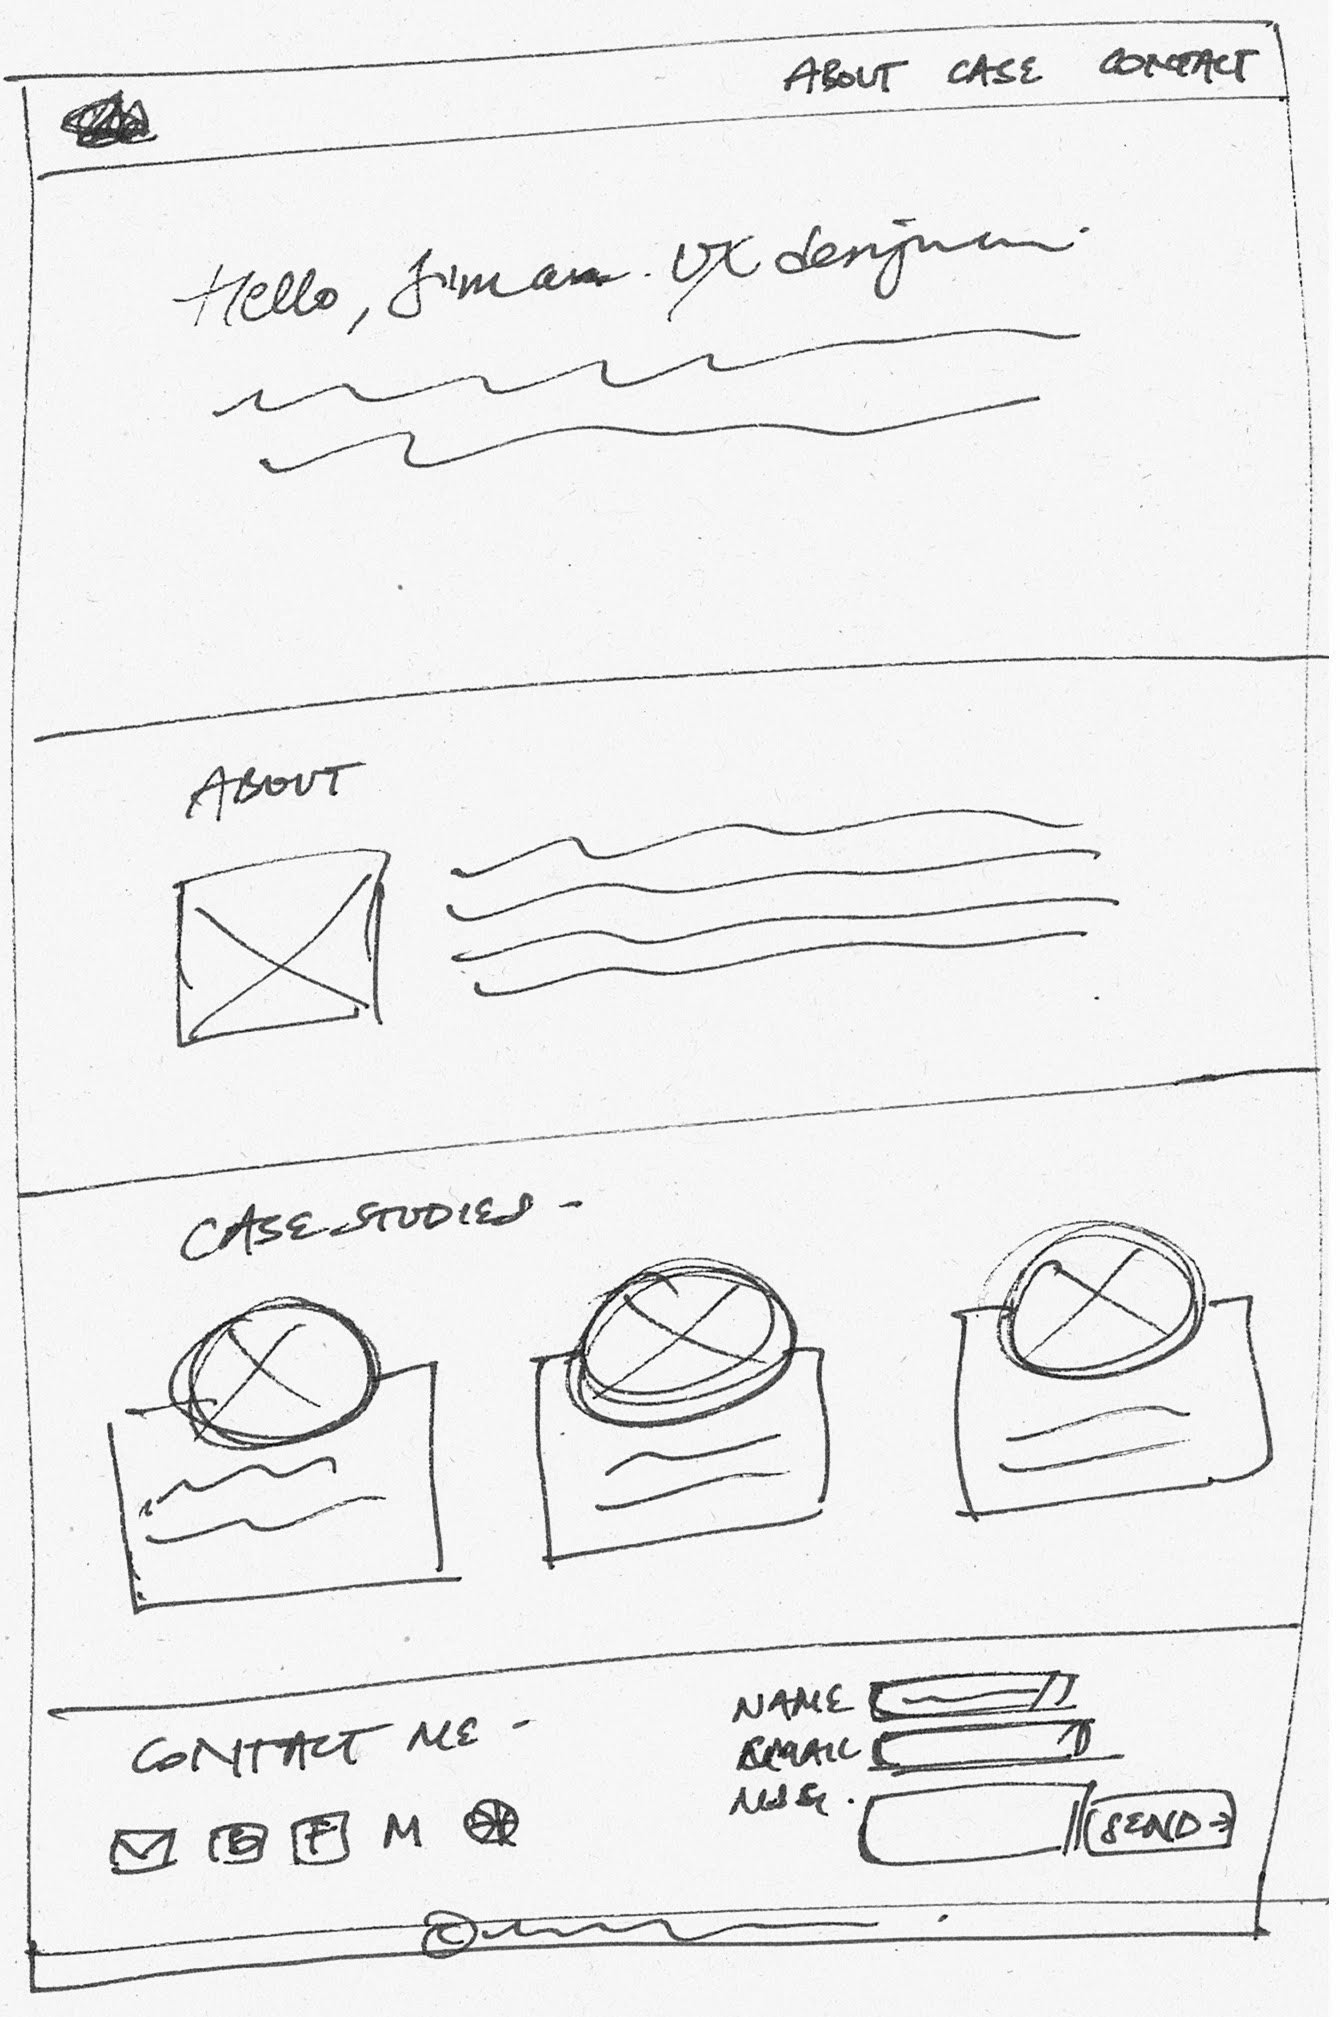 A sketch of the main page of the portfolio with components and layout.